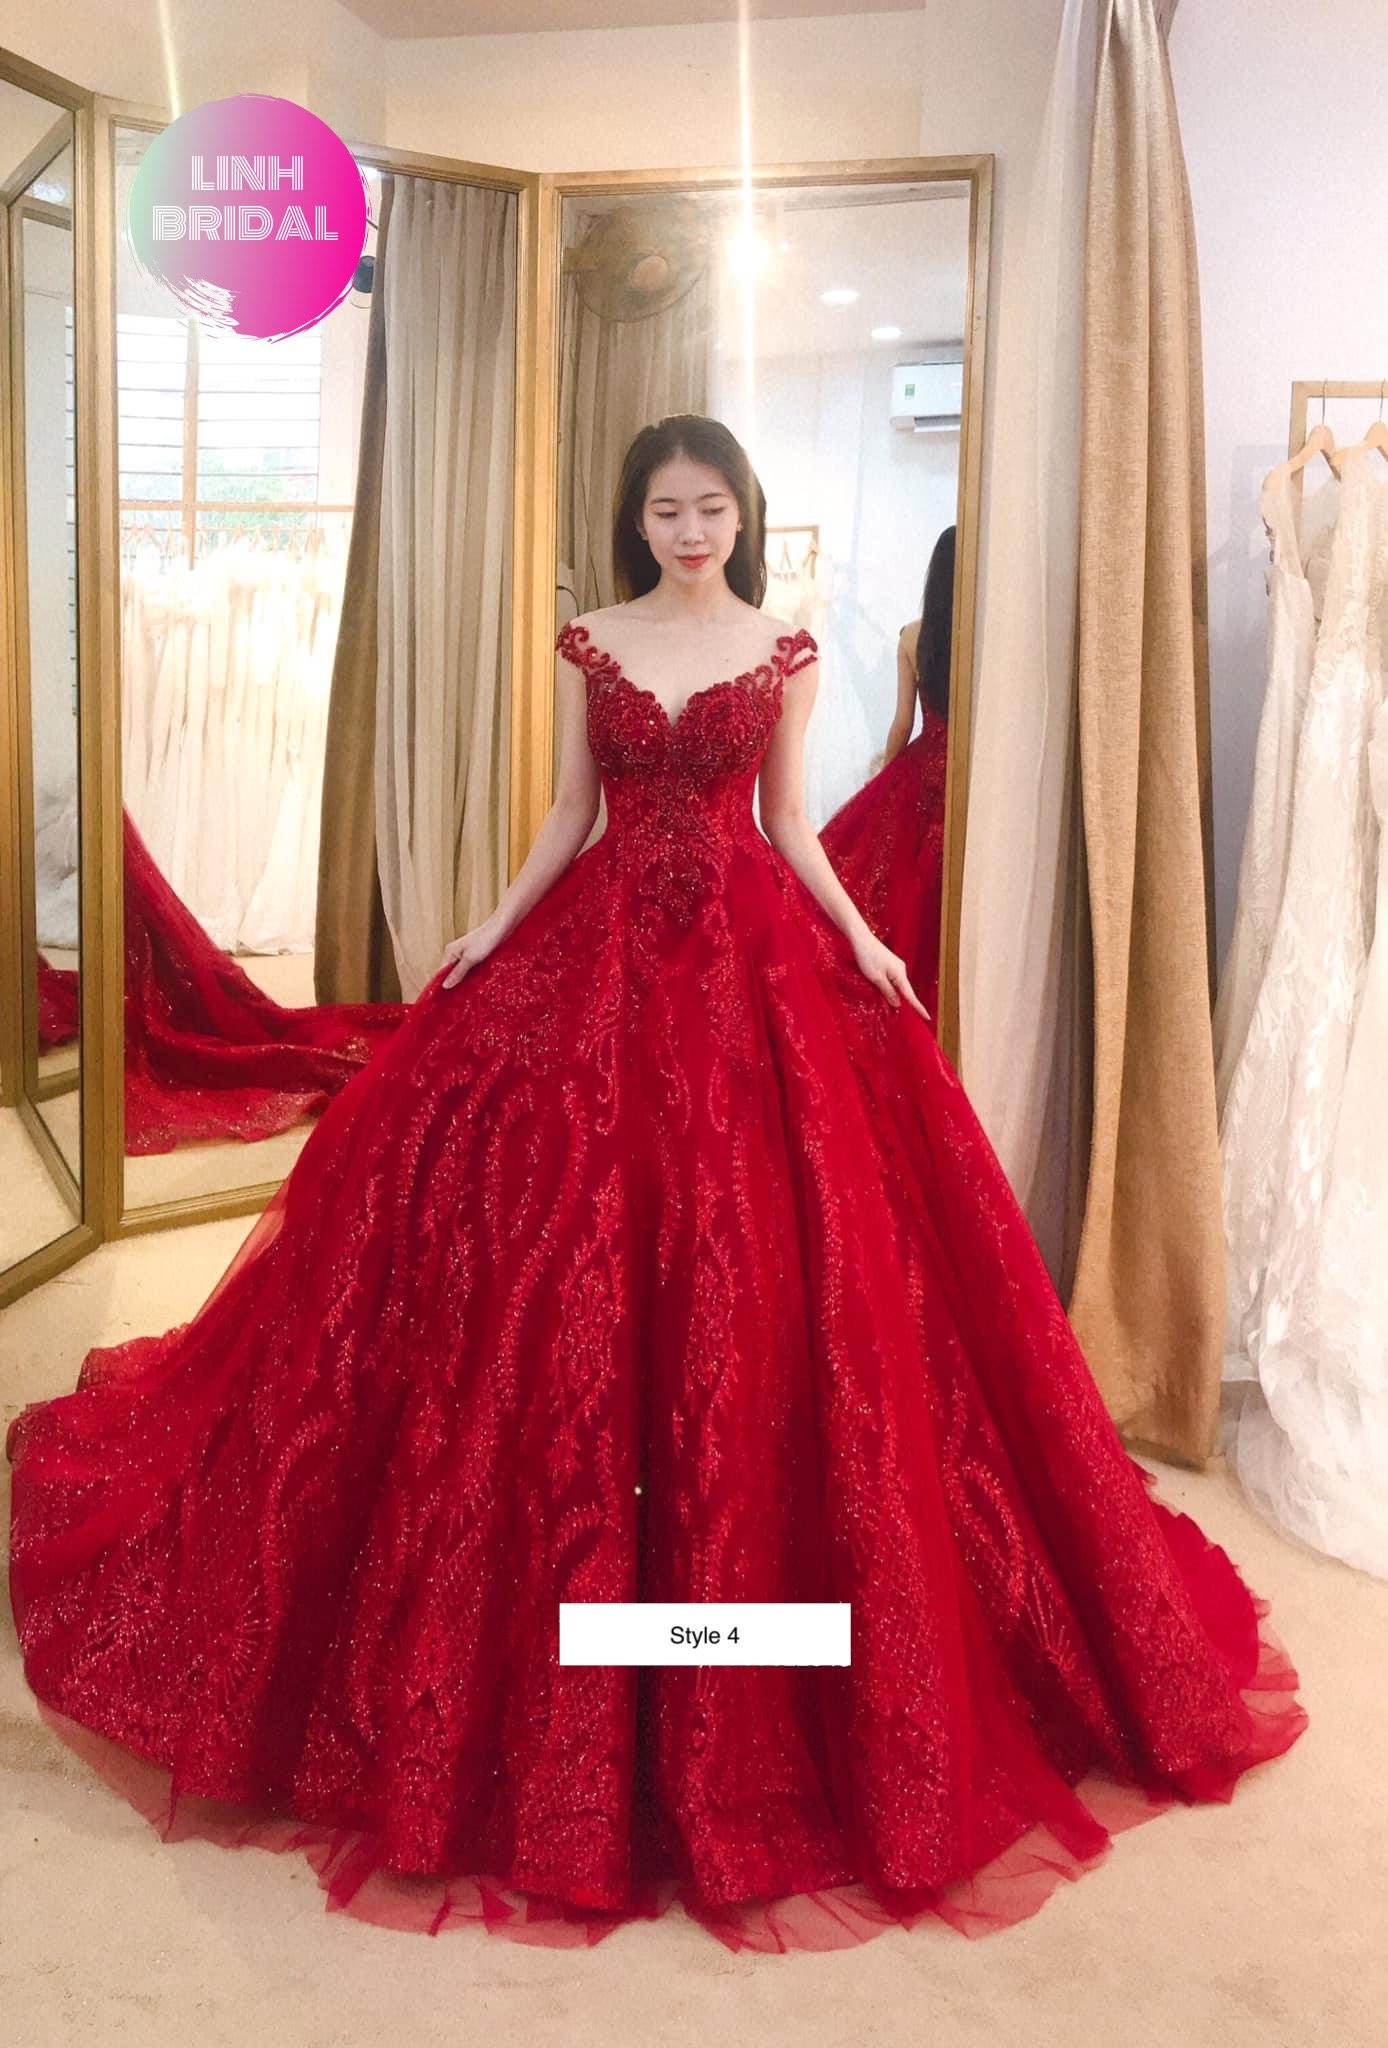 Buy Bright Red Princess Wedding Dress With Unique Neck Design, Made to  Measure Luxury Red Bridal Ball Gown Online in India - Etsy